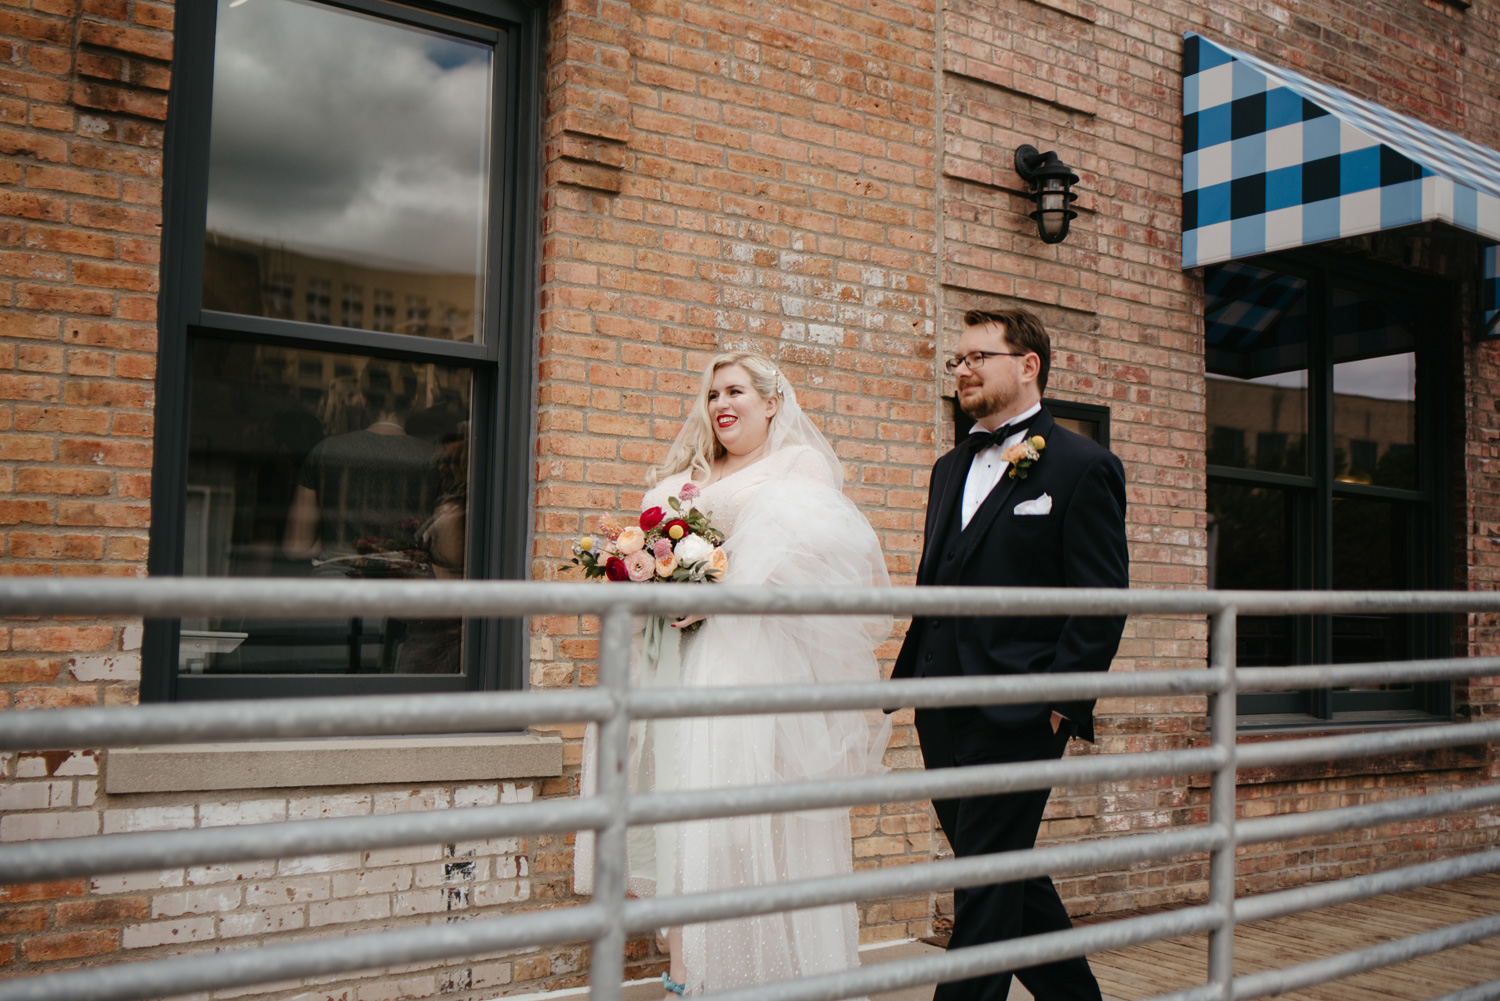 Bride and groom walking outside of venue together